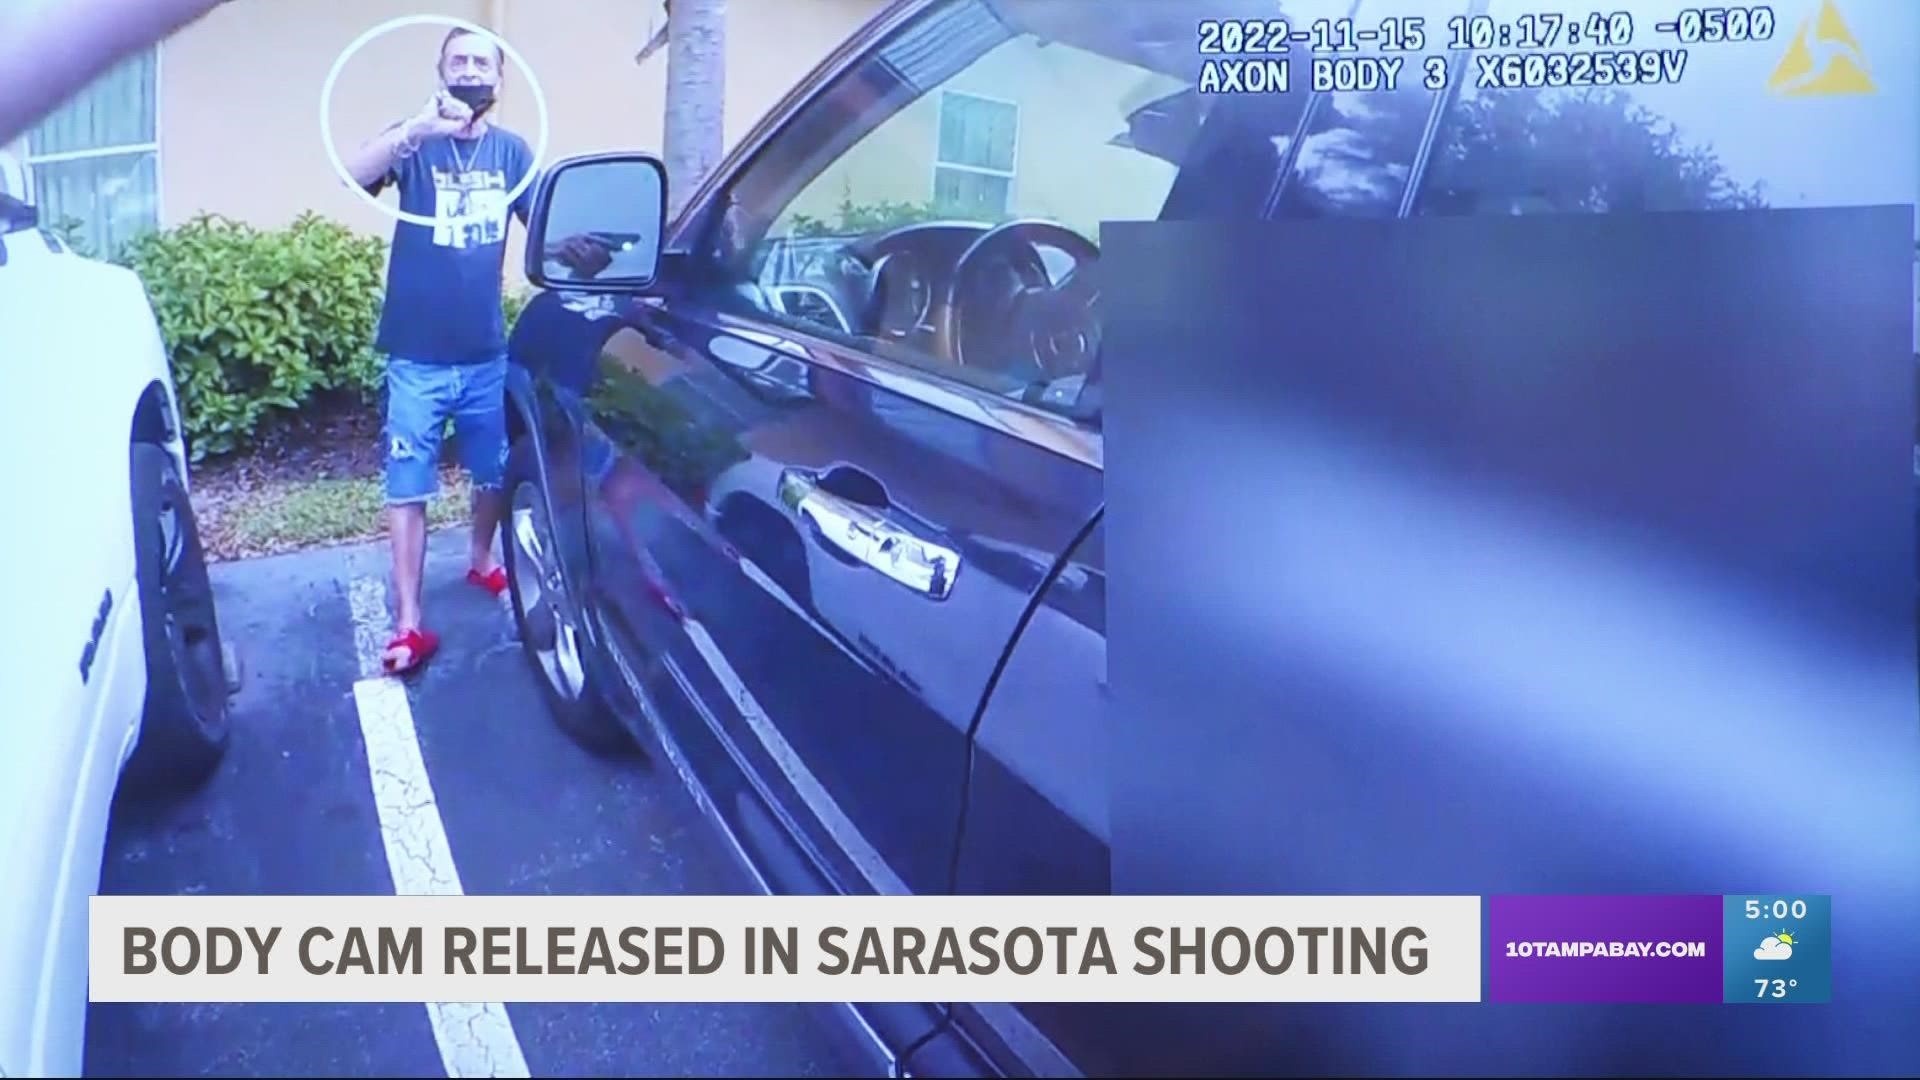 The 71-year-old man is expected to be OK after being shot Tuesday morning by a Sarasota officer.